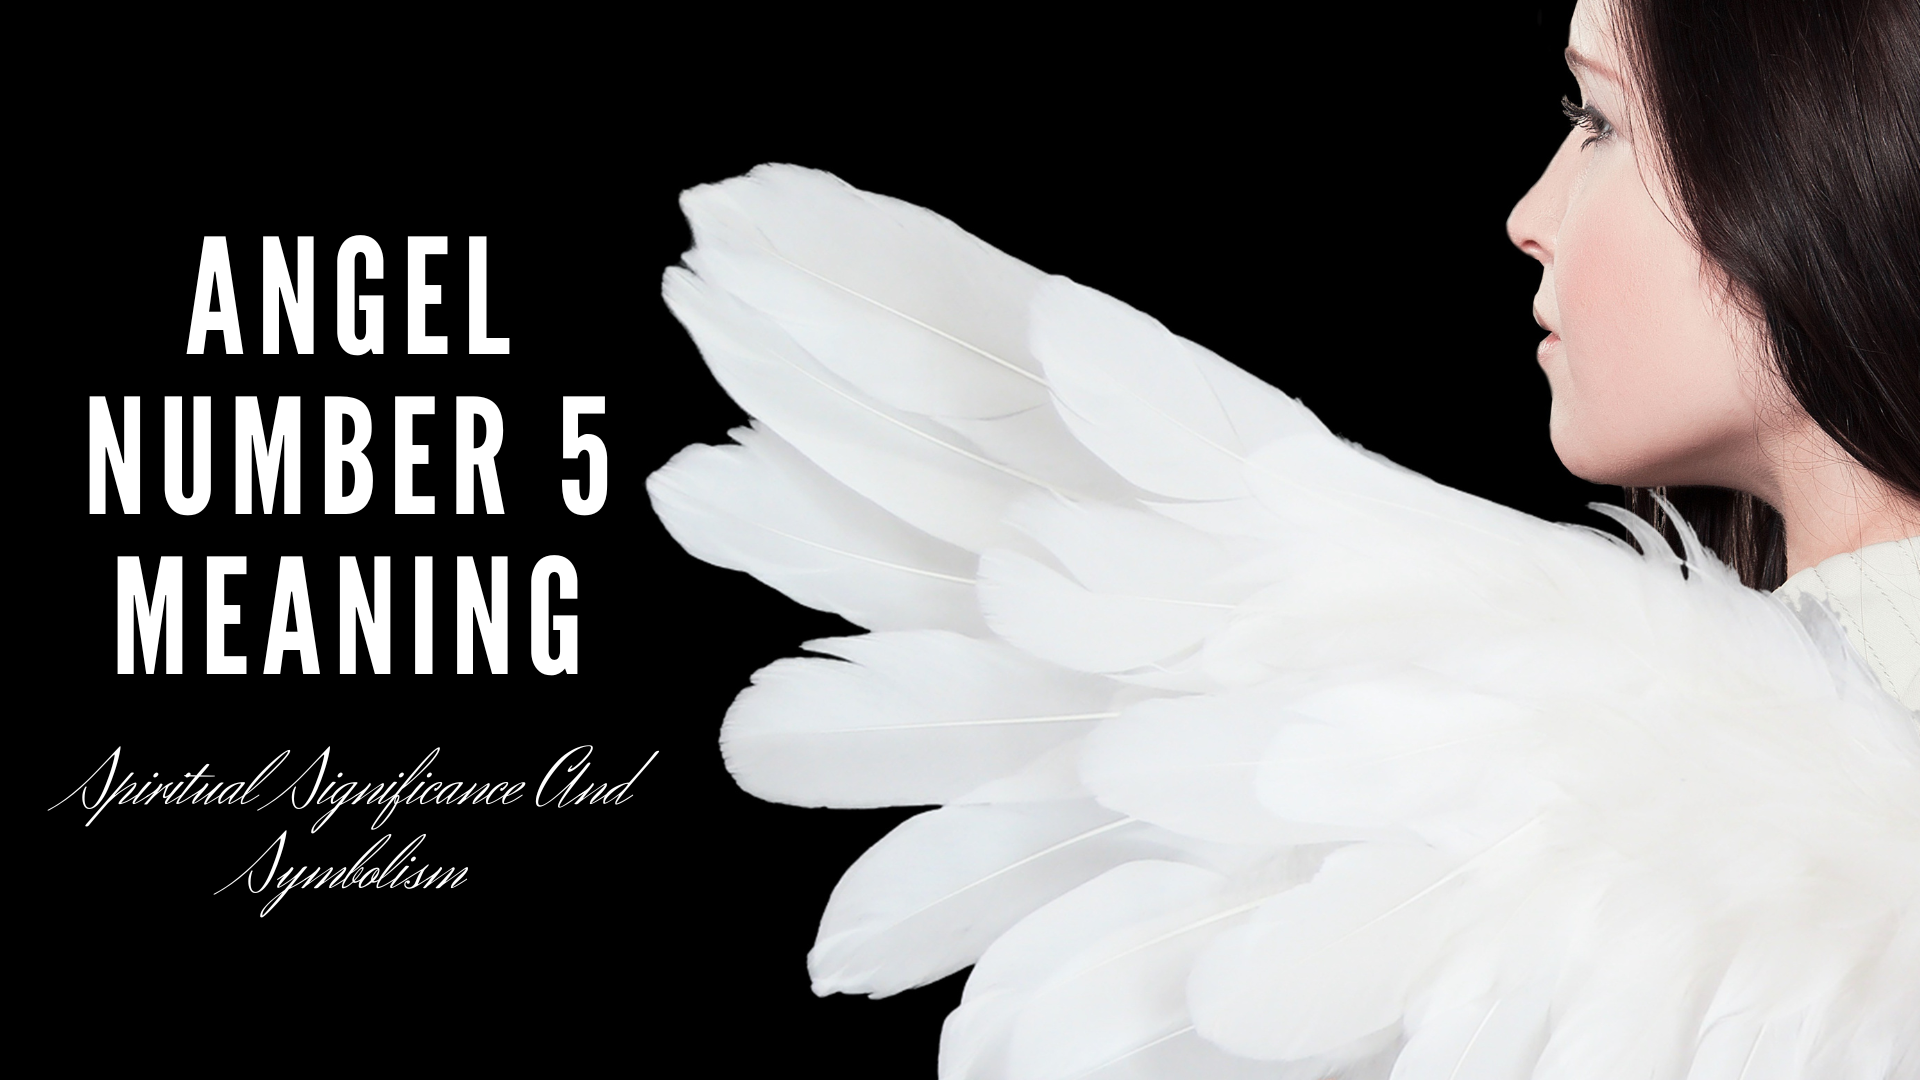 Angel Number 5 Meaning – Spiritual Significance And Symbolism